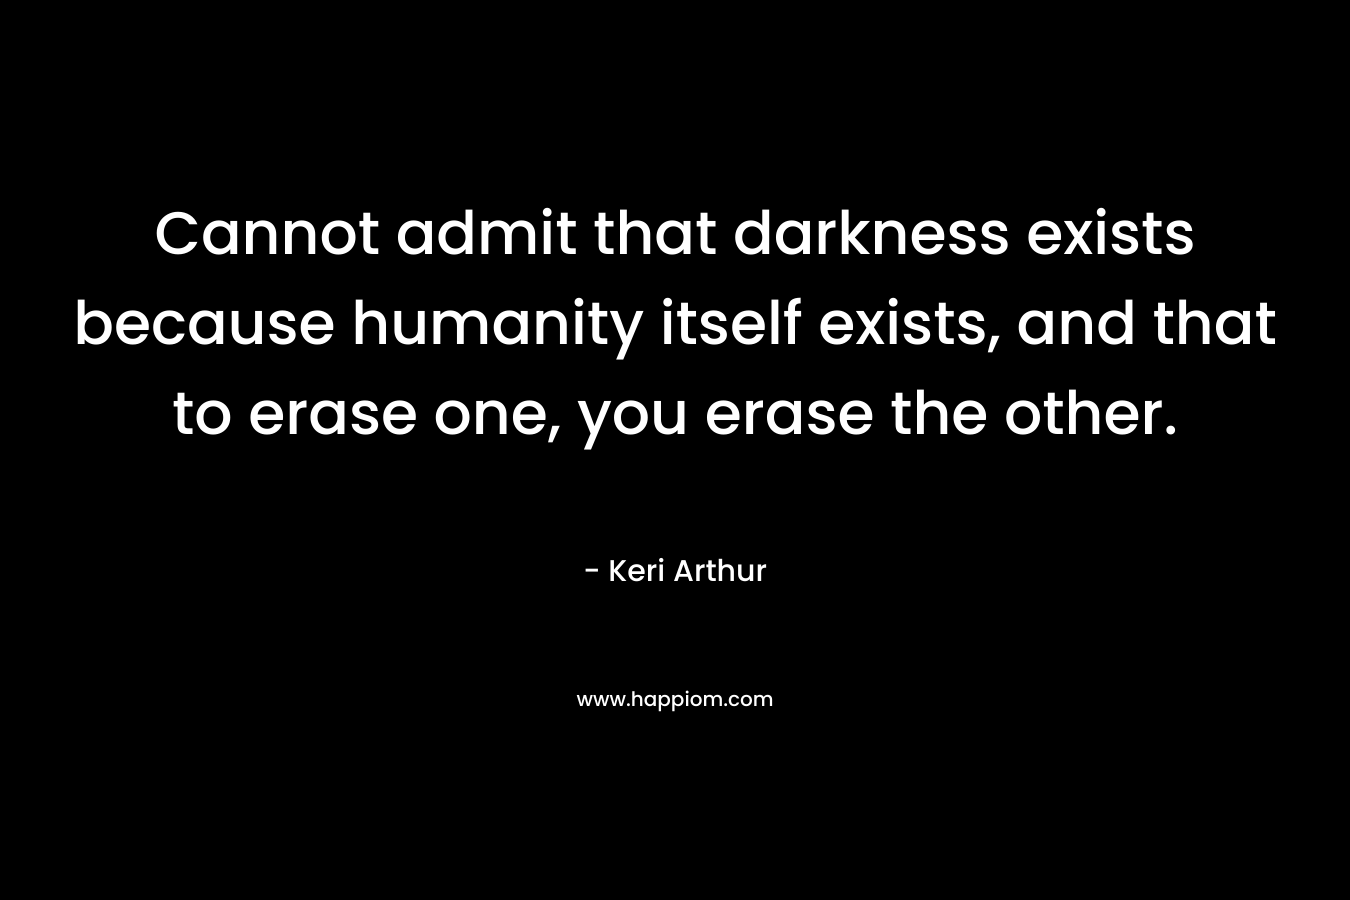 Cannot admit that darkness exists because humanity itself exists, and that to erase one, you erase the other. – Keri Arthur